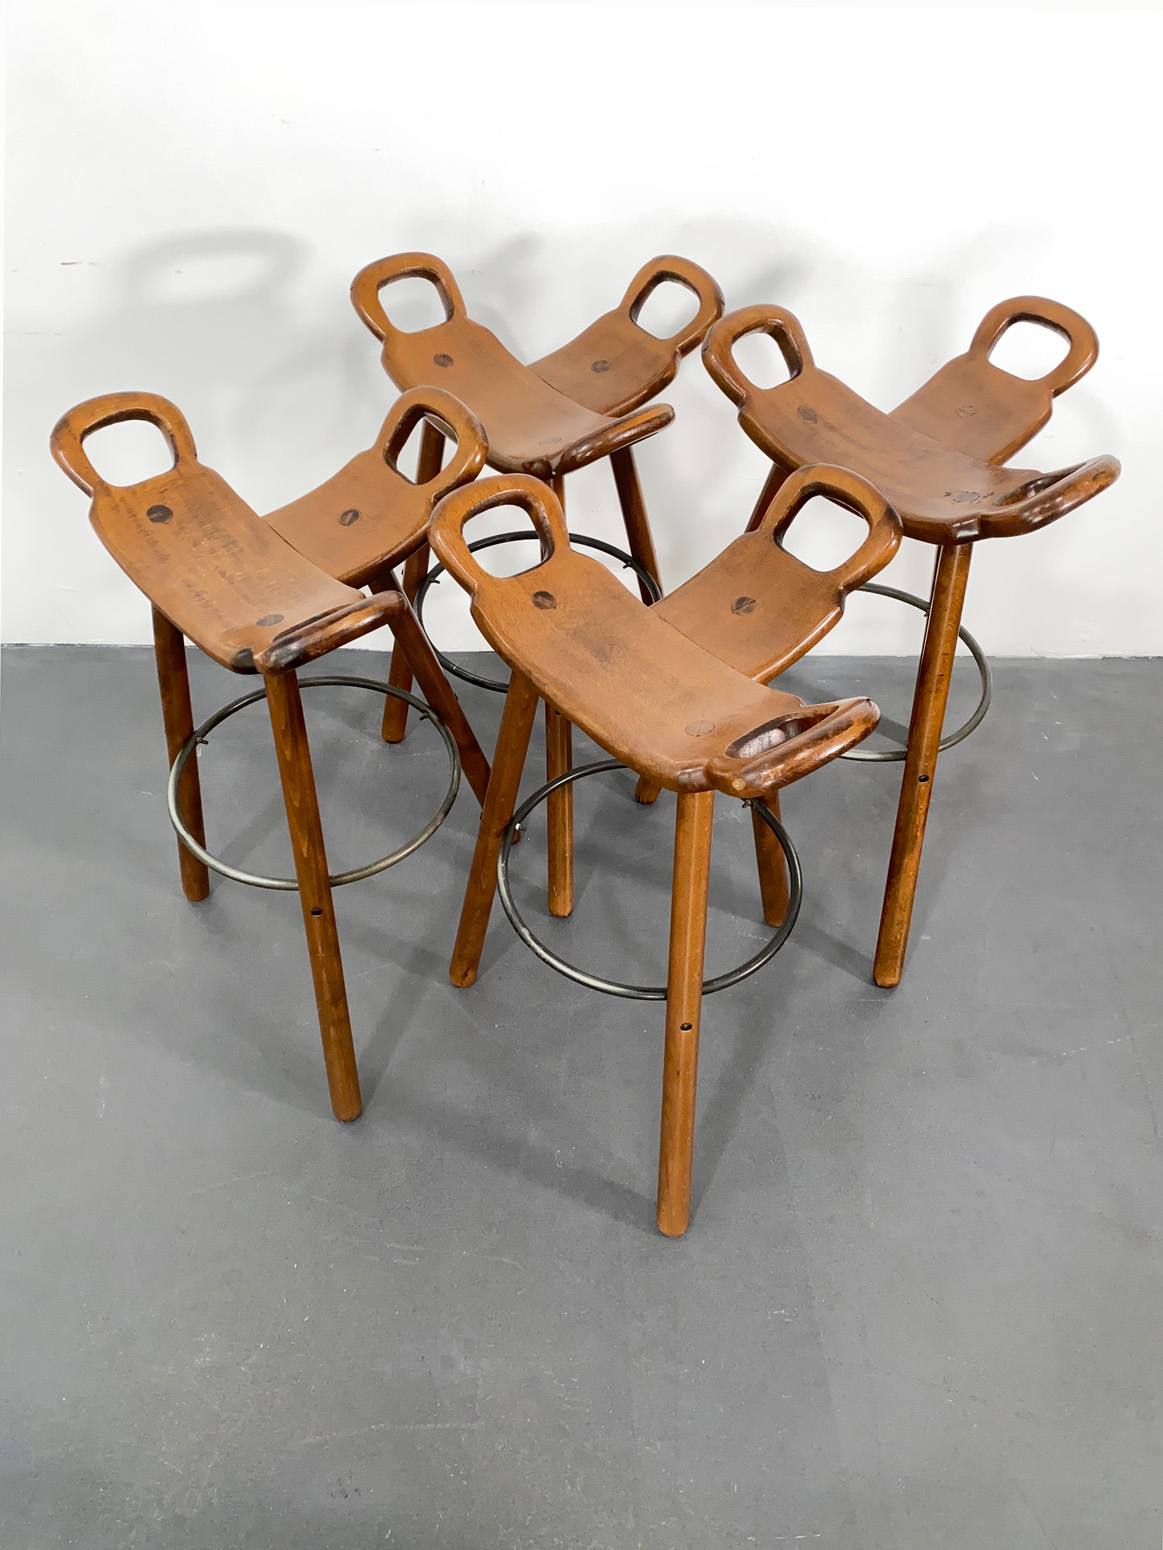 “SOLD ” 4 Mid Century Marbella Barstools by Sergio Rodrigues for Confonorm, Spain, 1970s.